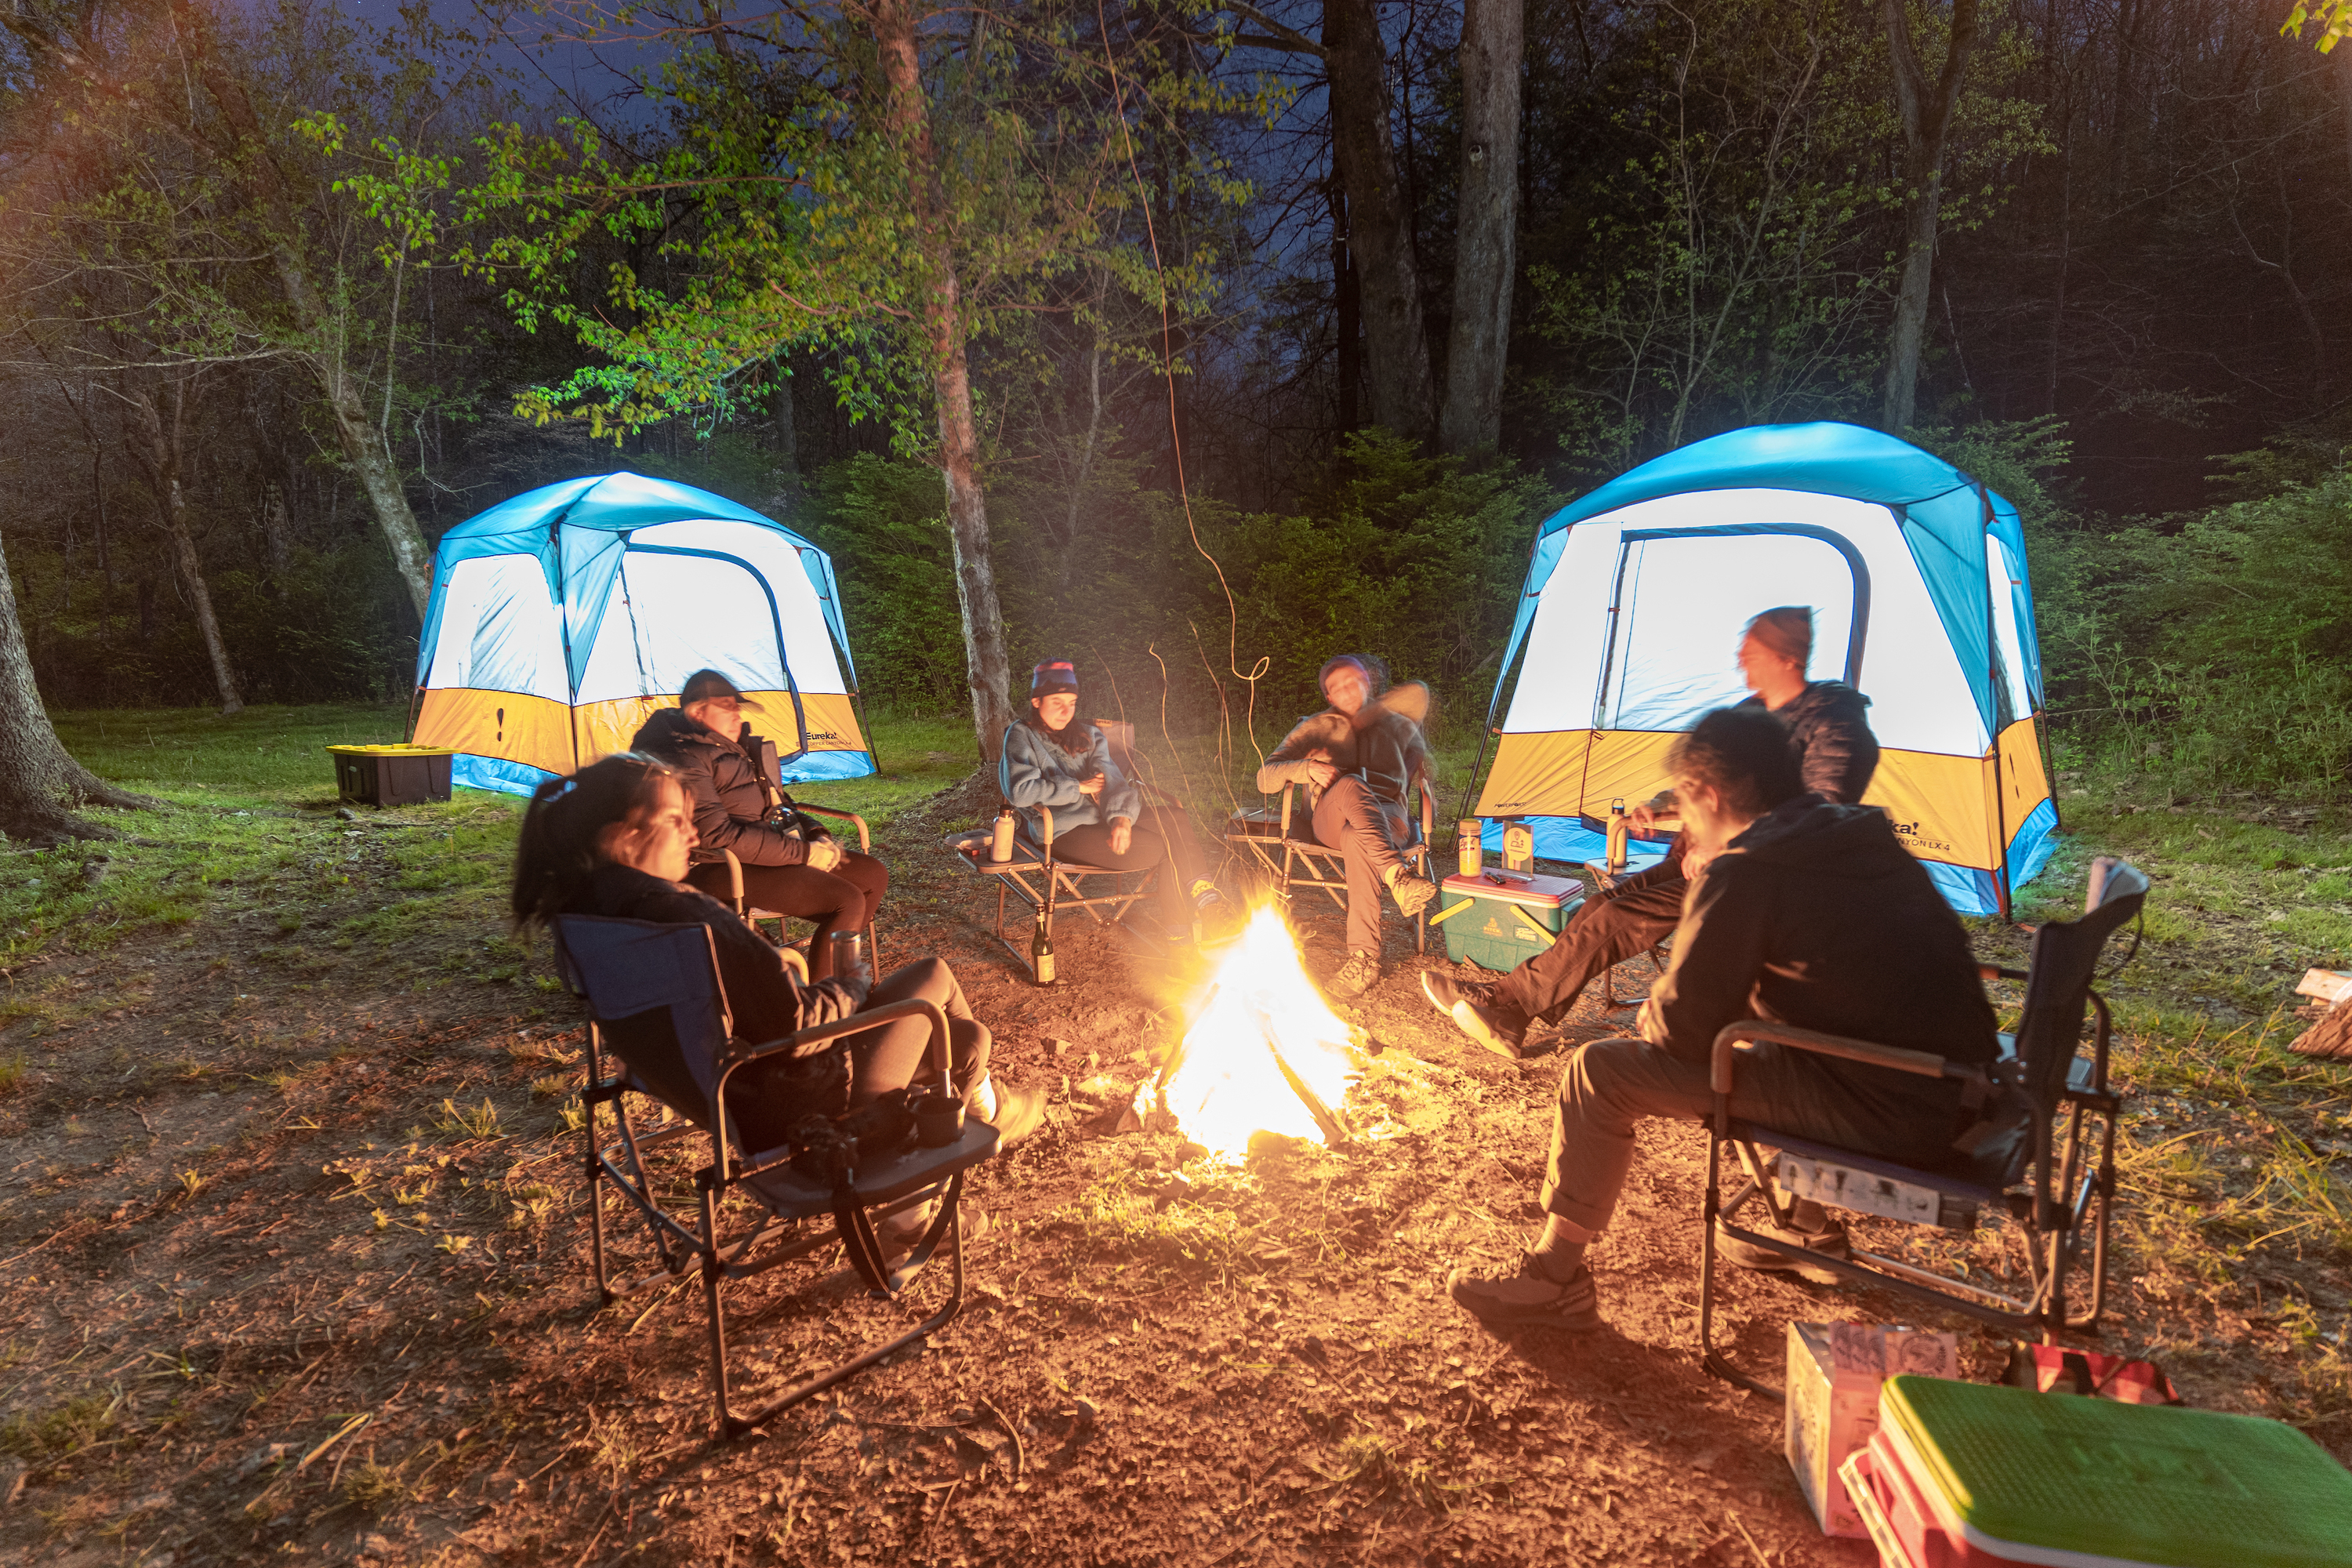 Camping offers a chance to enjoy great outdoors - masslive.com